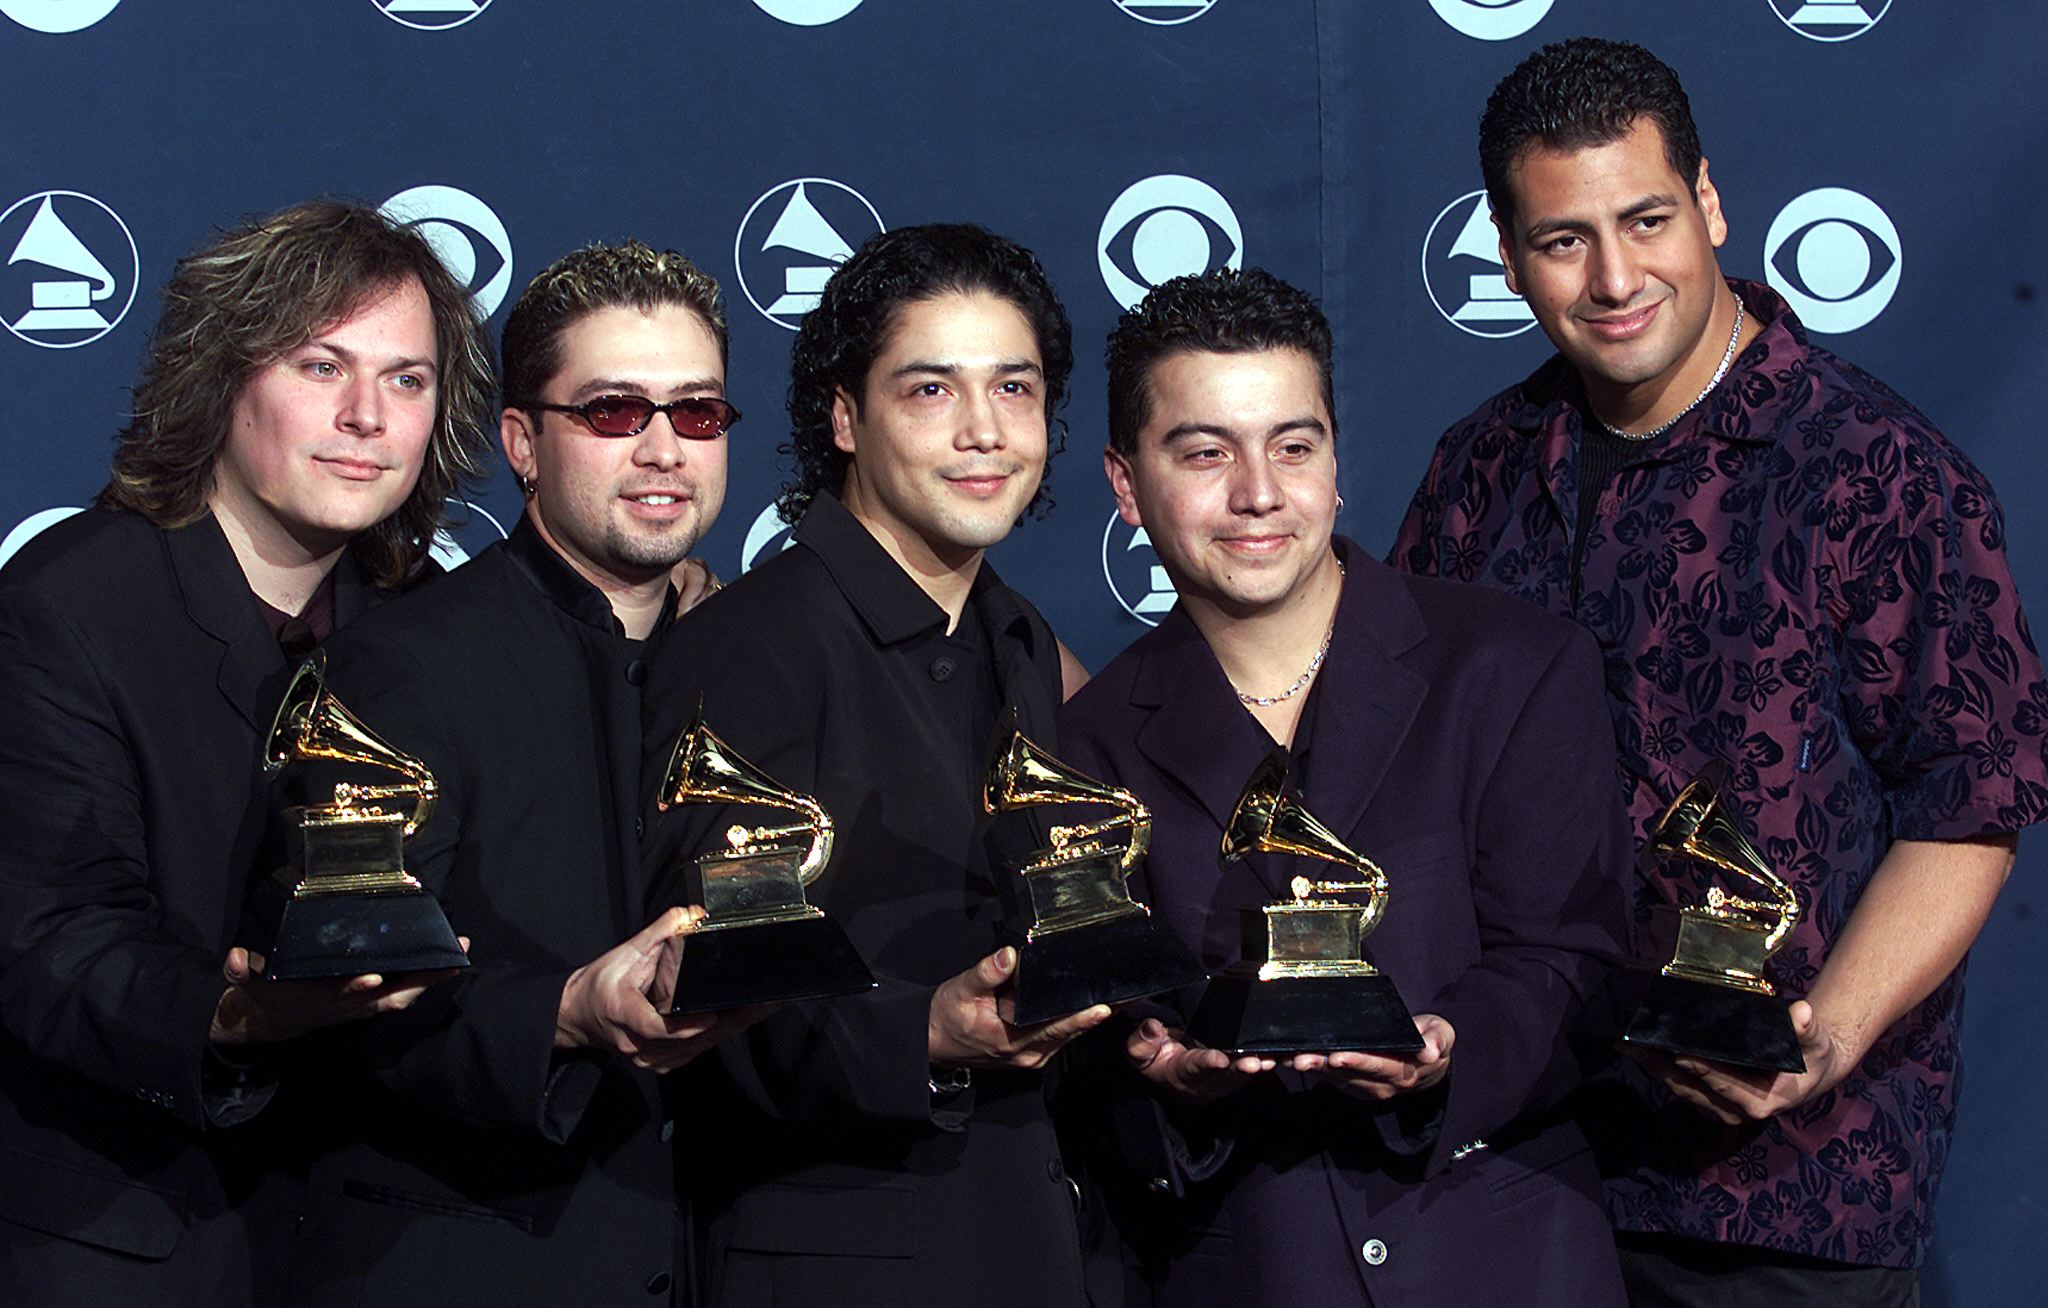 Chris Perez (C) and his band at the 42nd Annual Grammy Awards 23 February, 2000. | Source: Getty Images